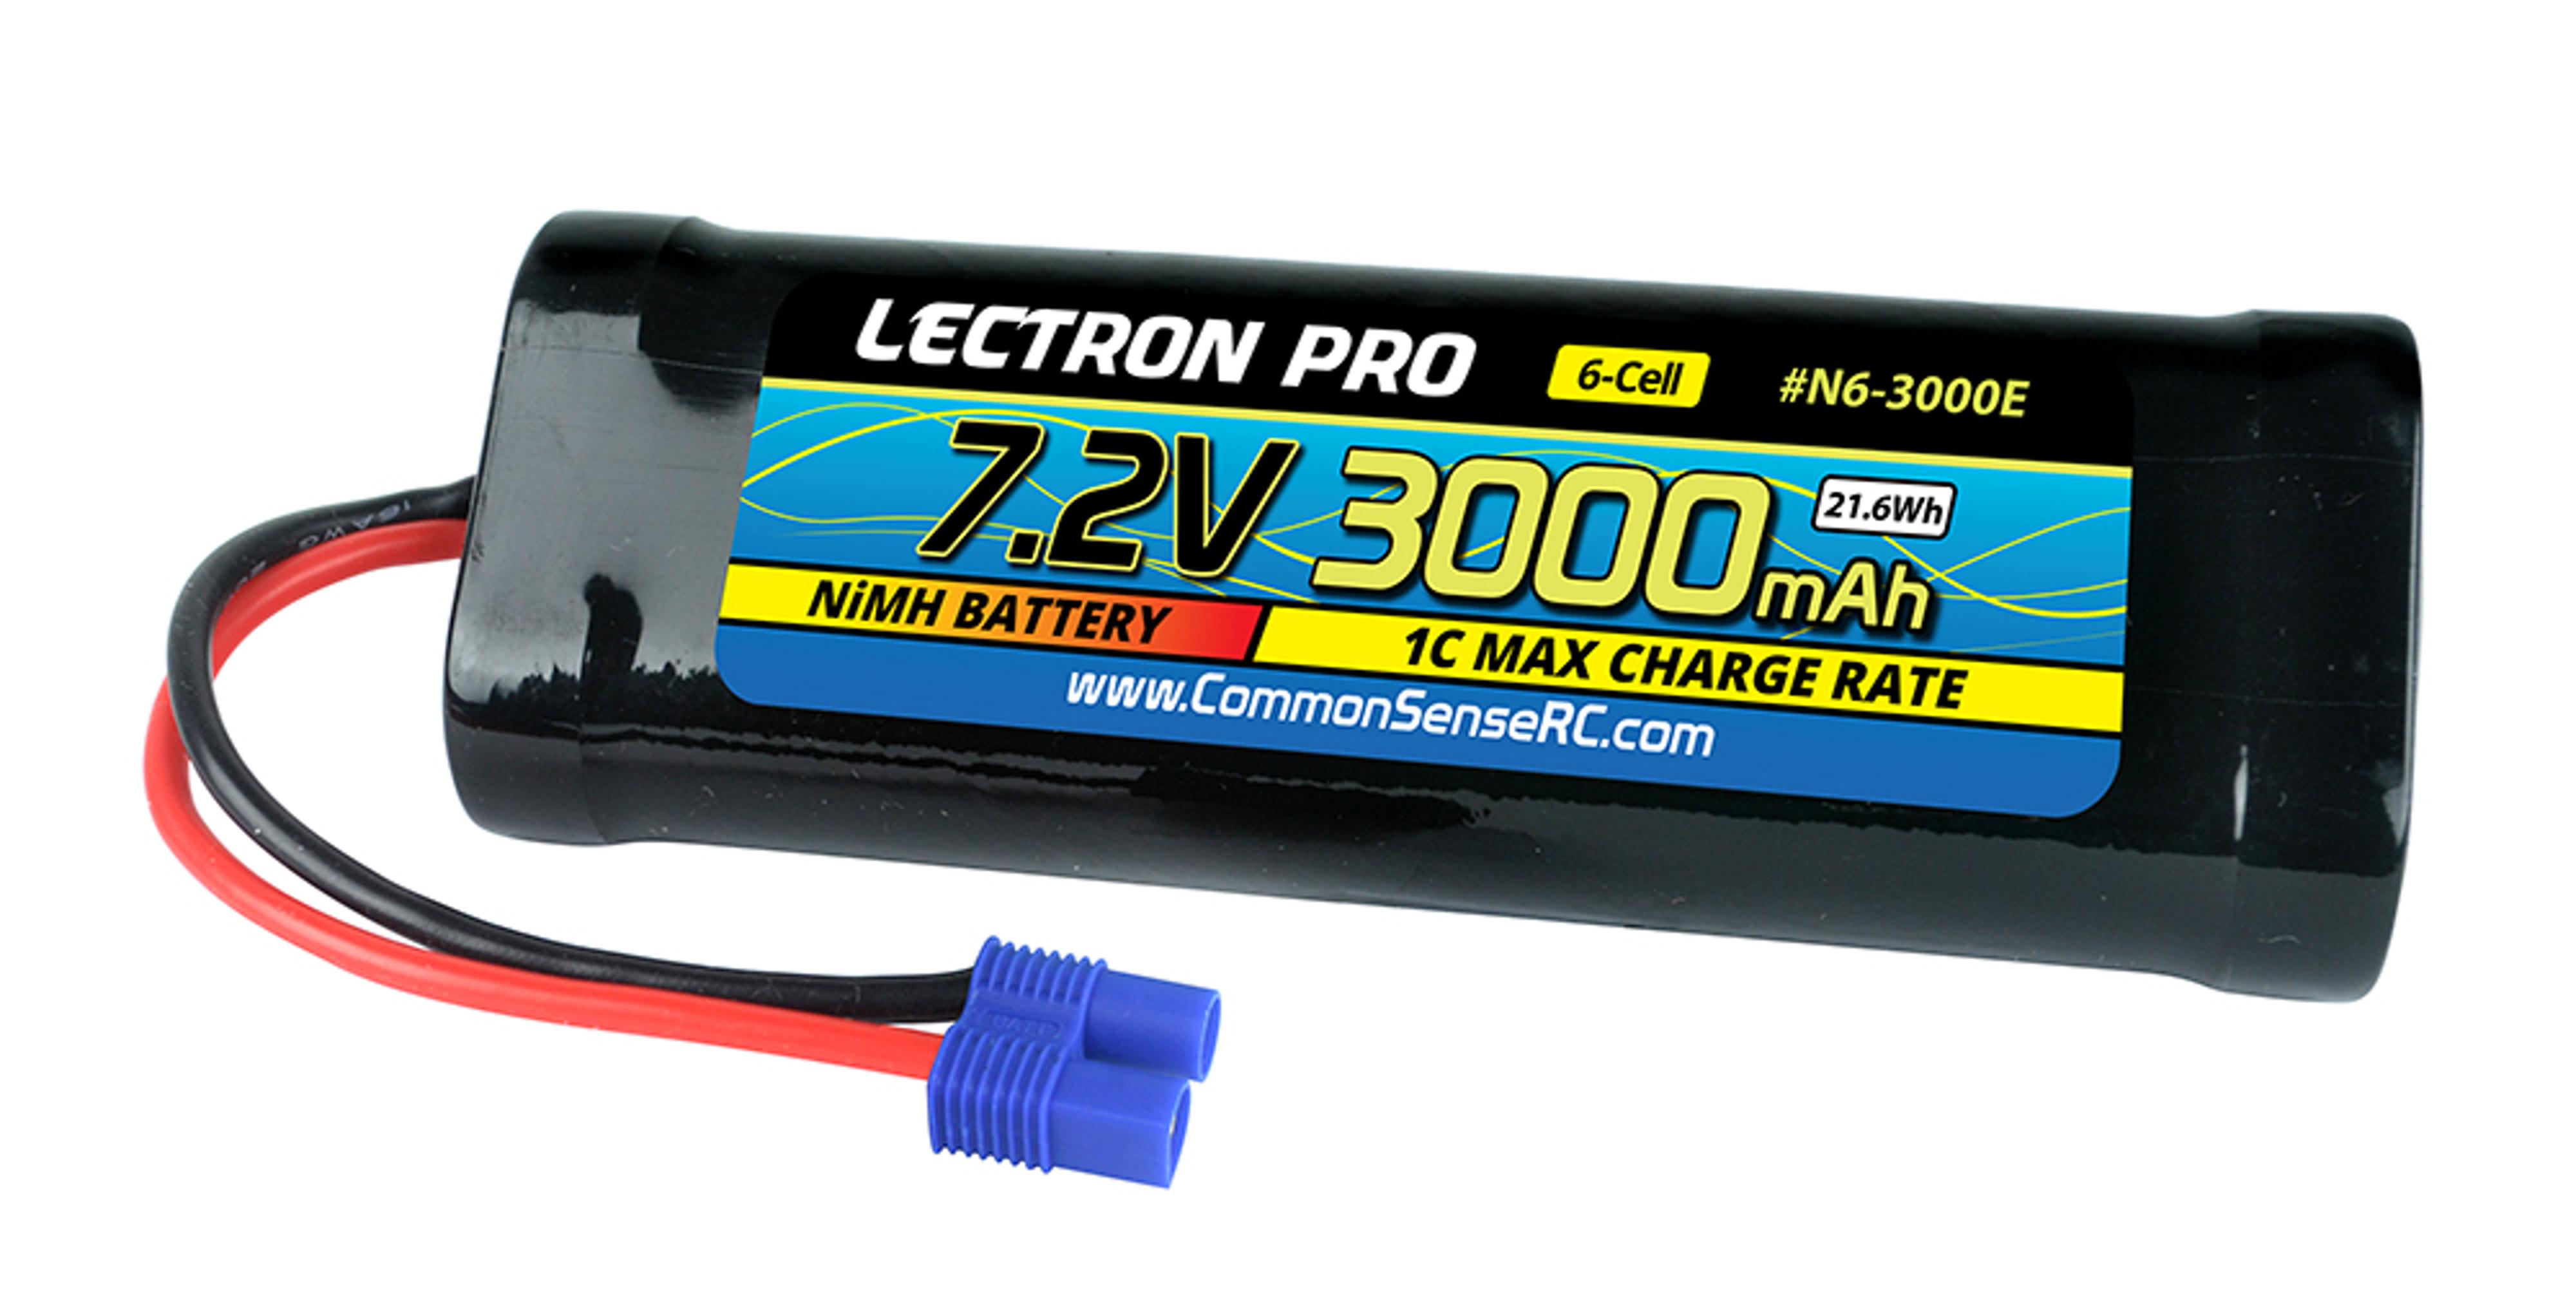 Lectron Pro NiMH 7.2V 6S 3000mAh Flat Pack with EC3 Connector